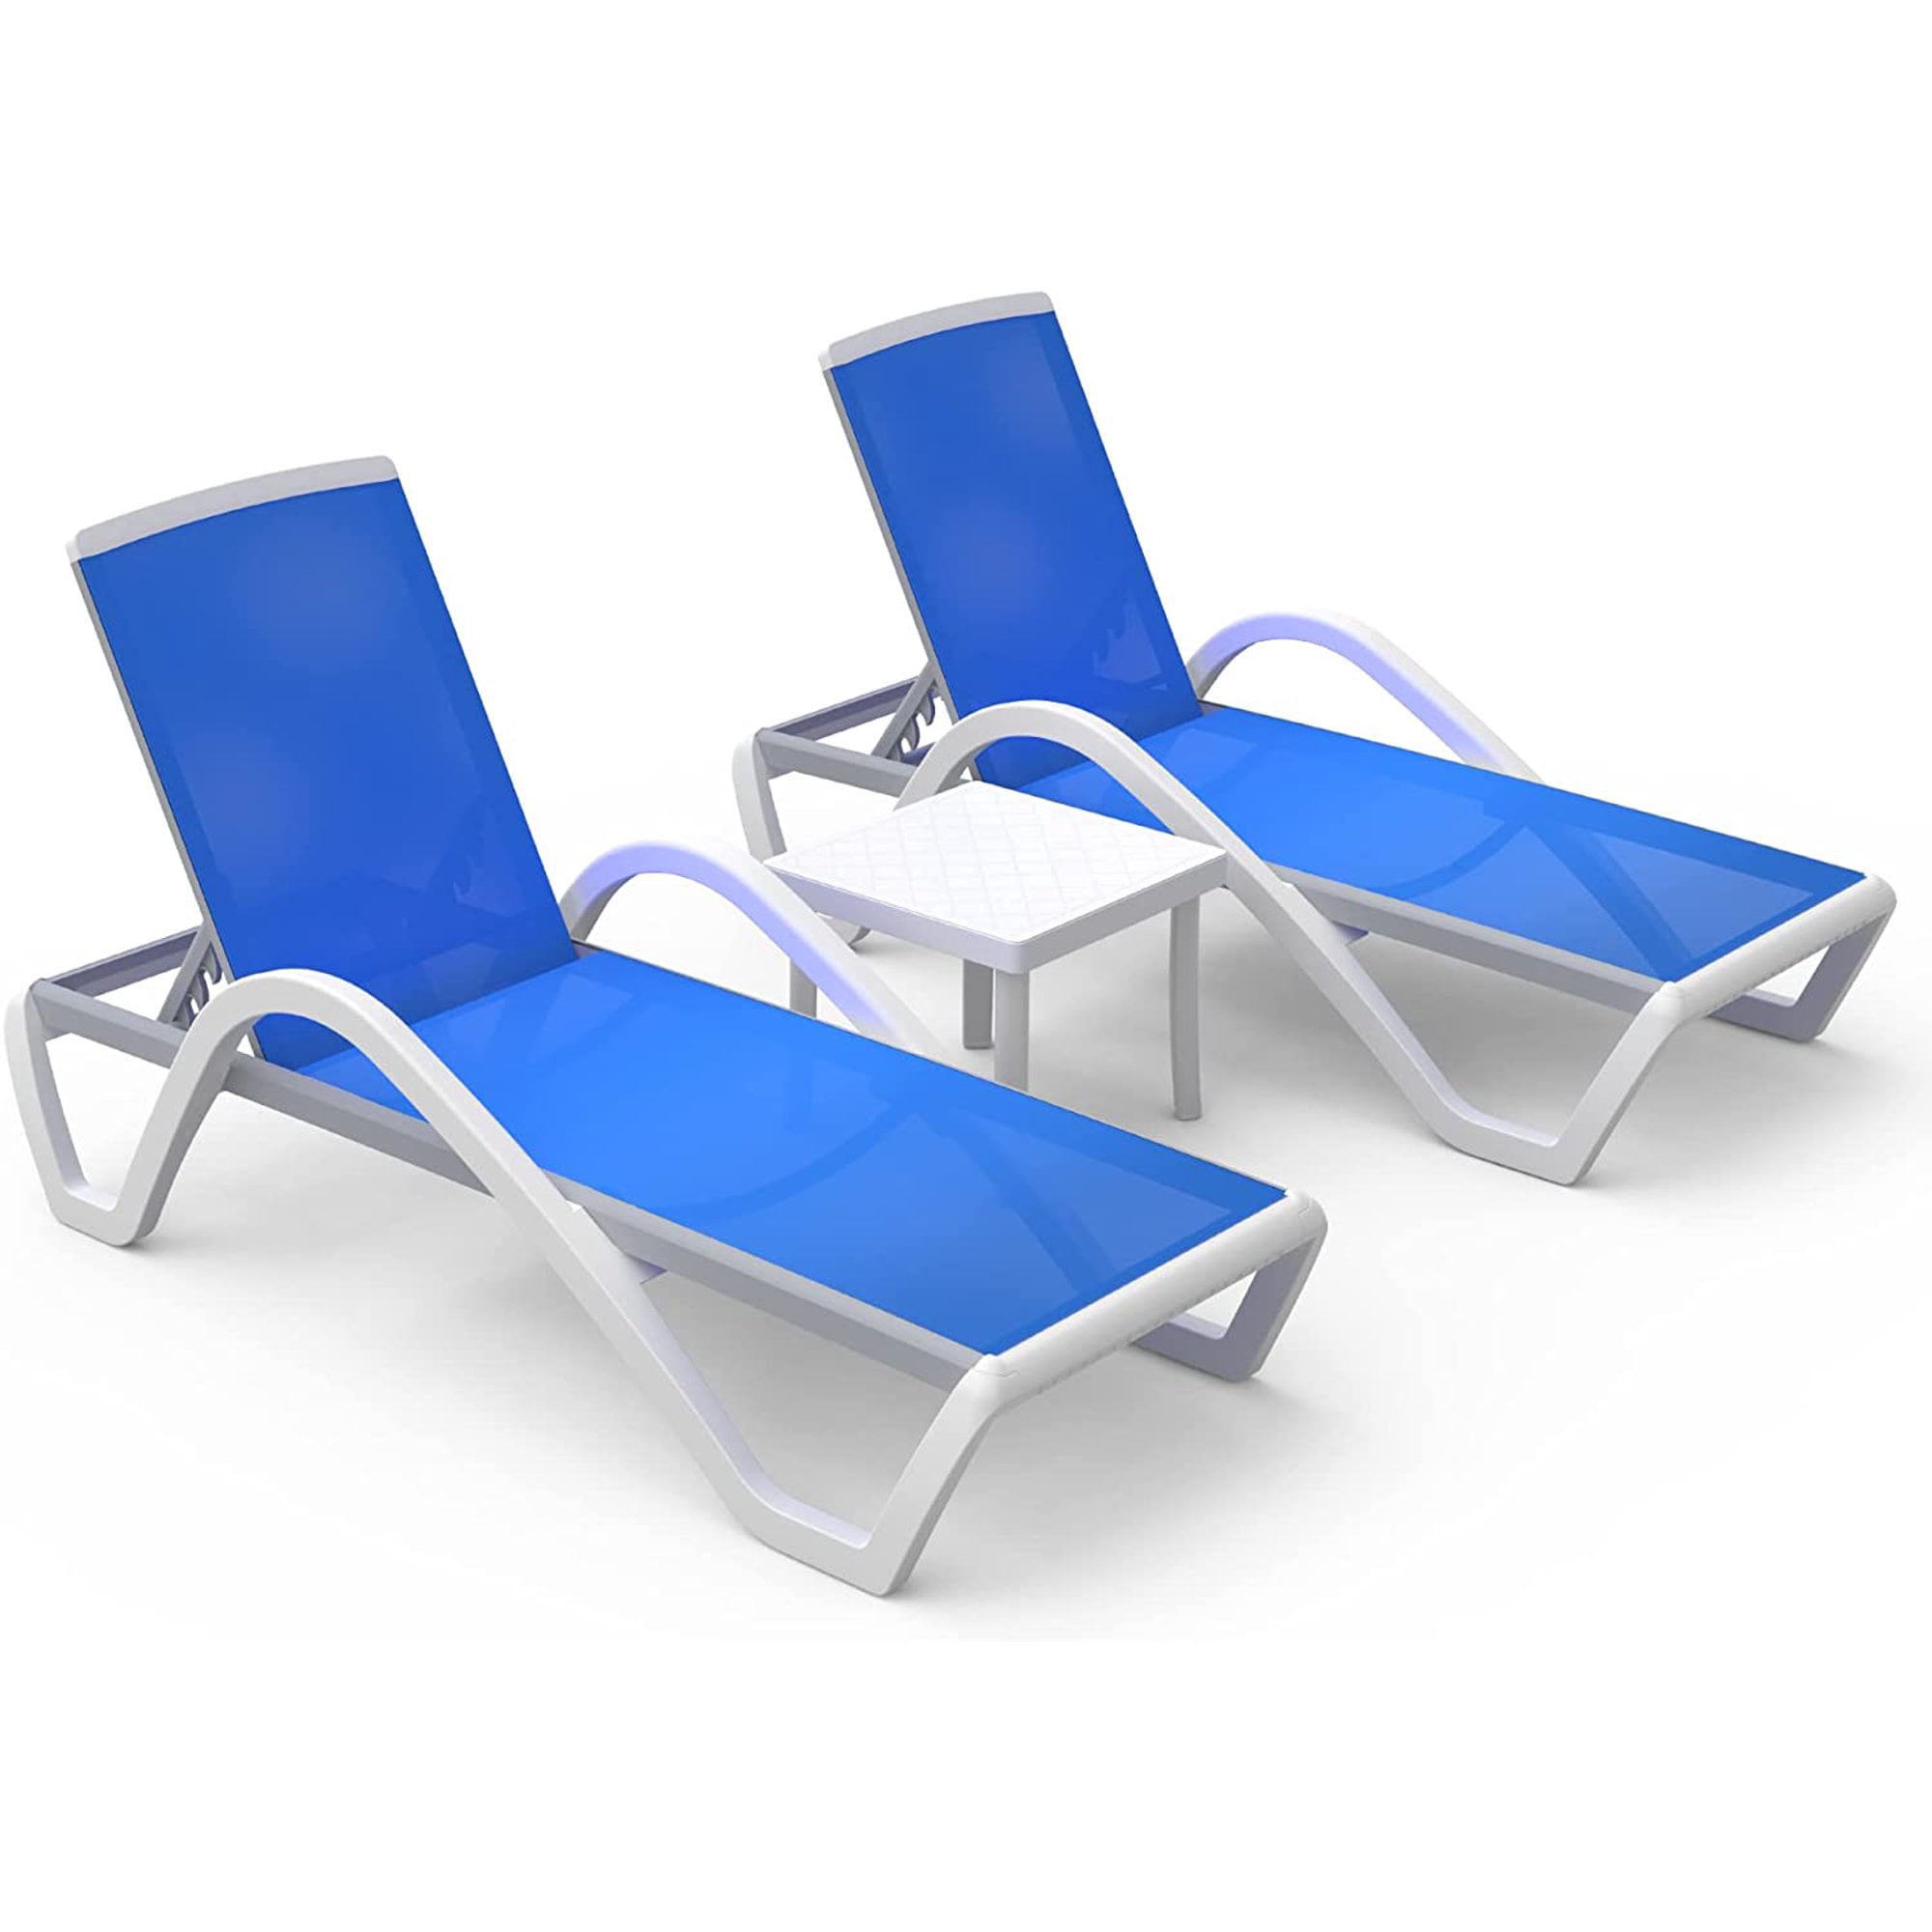 VredHom Outdoor Portable Folding Chaise Lounge Chair with Table (Set of 3)  - 70 L x 20 W x 14 H - On Sale - Bed Bath & Beyond - 34538624